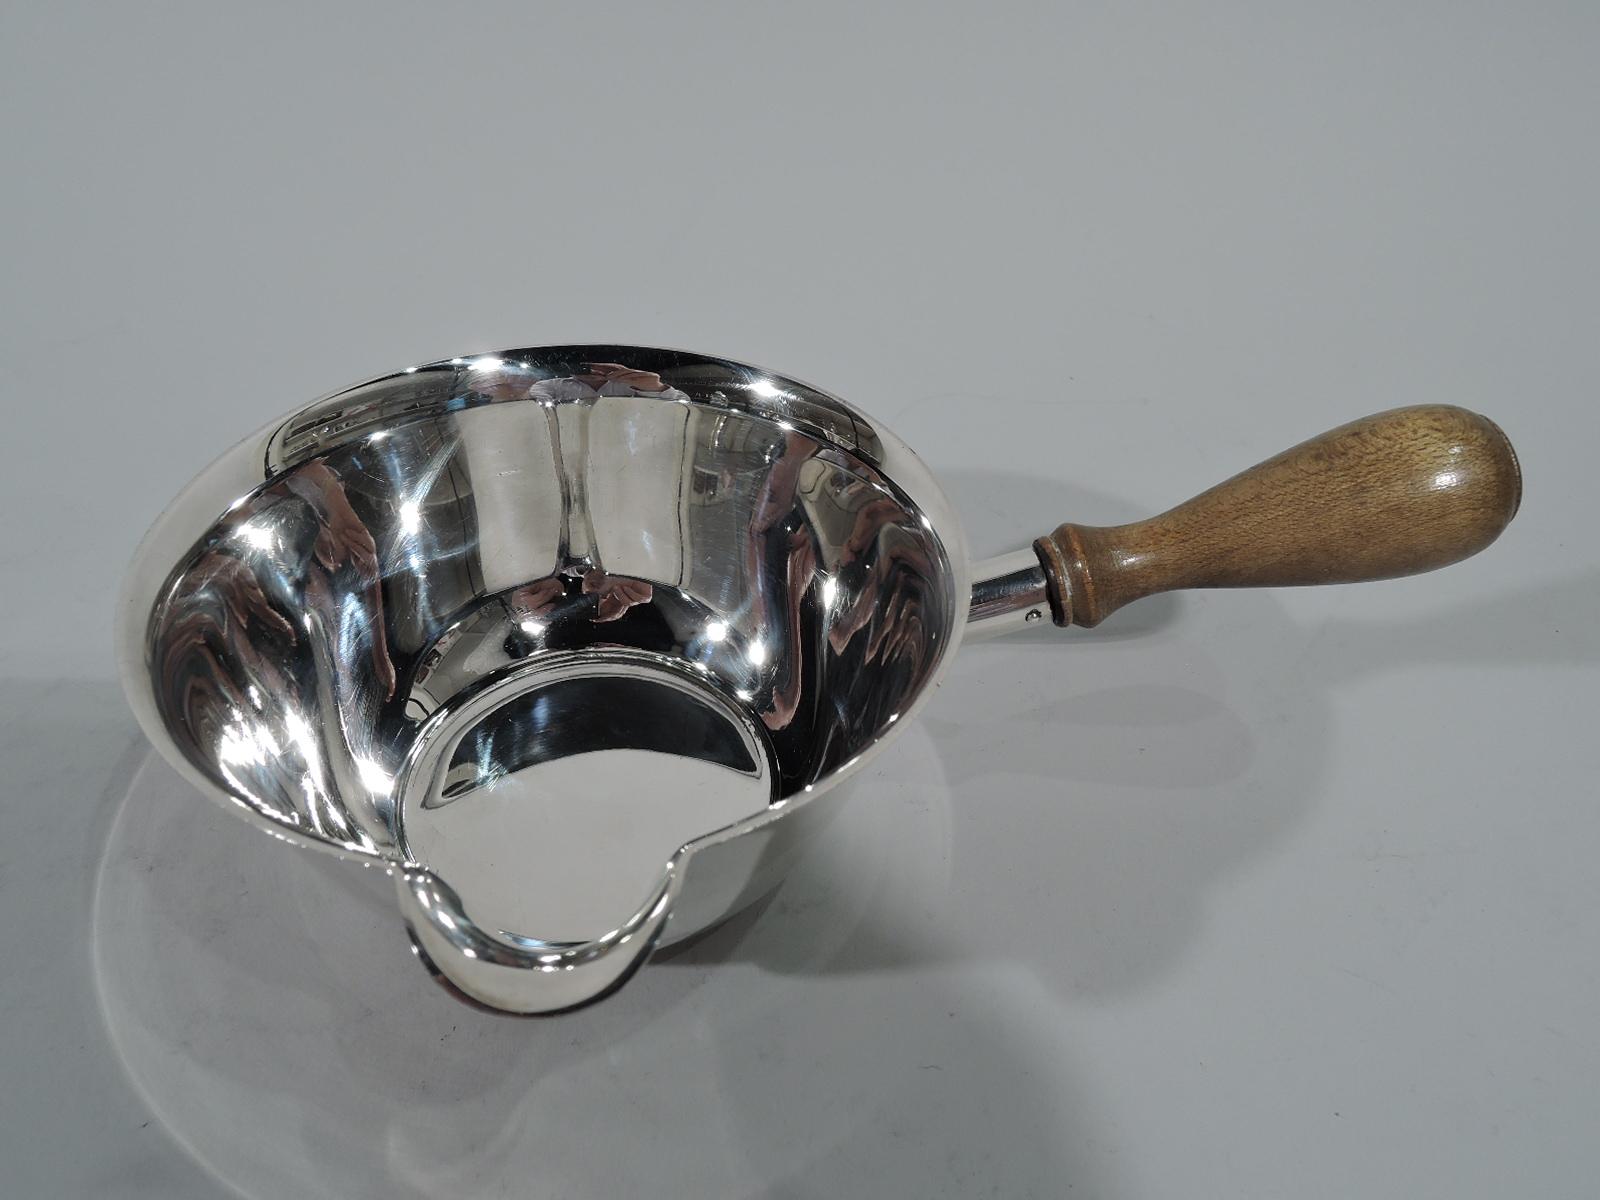 Mid-Century Modern sterling silver pipkin. Curved and tapering sides, V-Form lip spout, and stained-wood baluster handle. Hallmark includes pattern no. 22739 and director’s letter M (1947-56). Gross weight: 6.4 troy ounces.